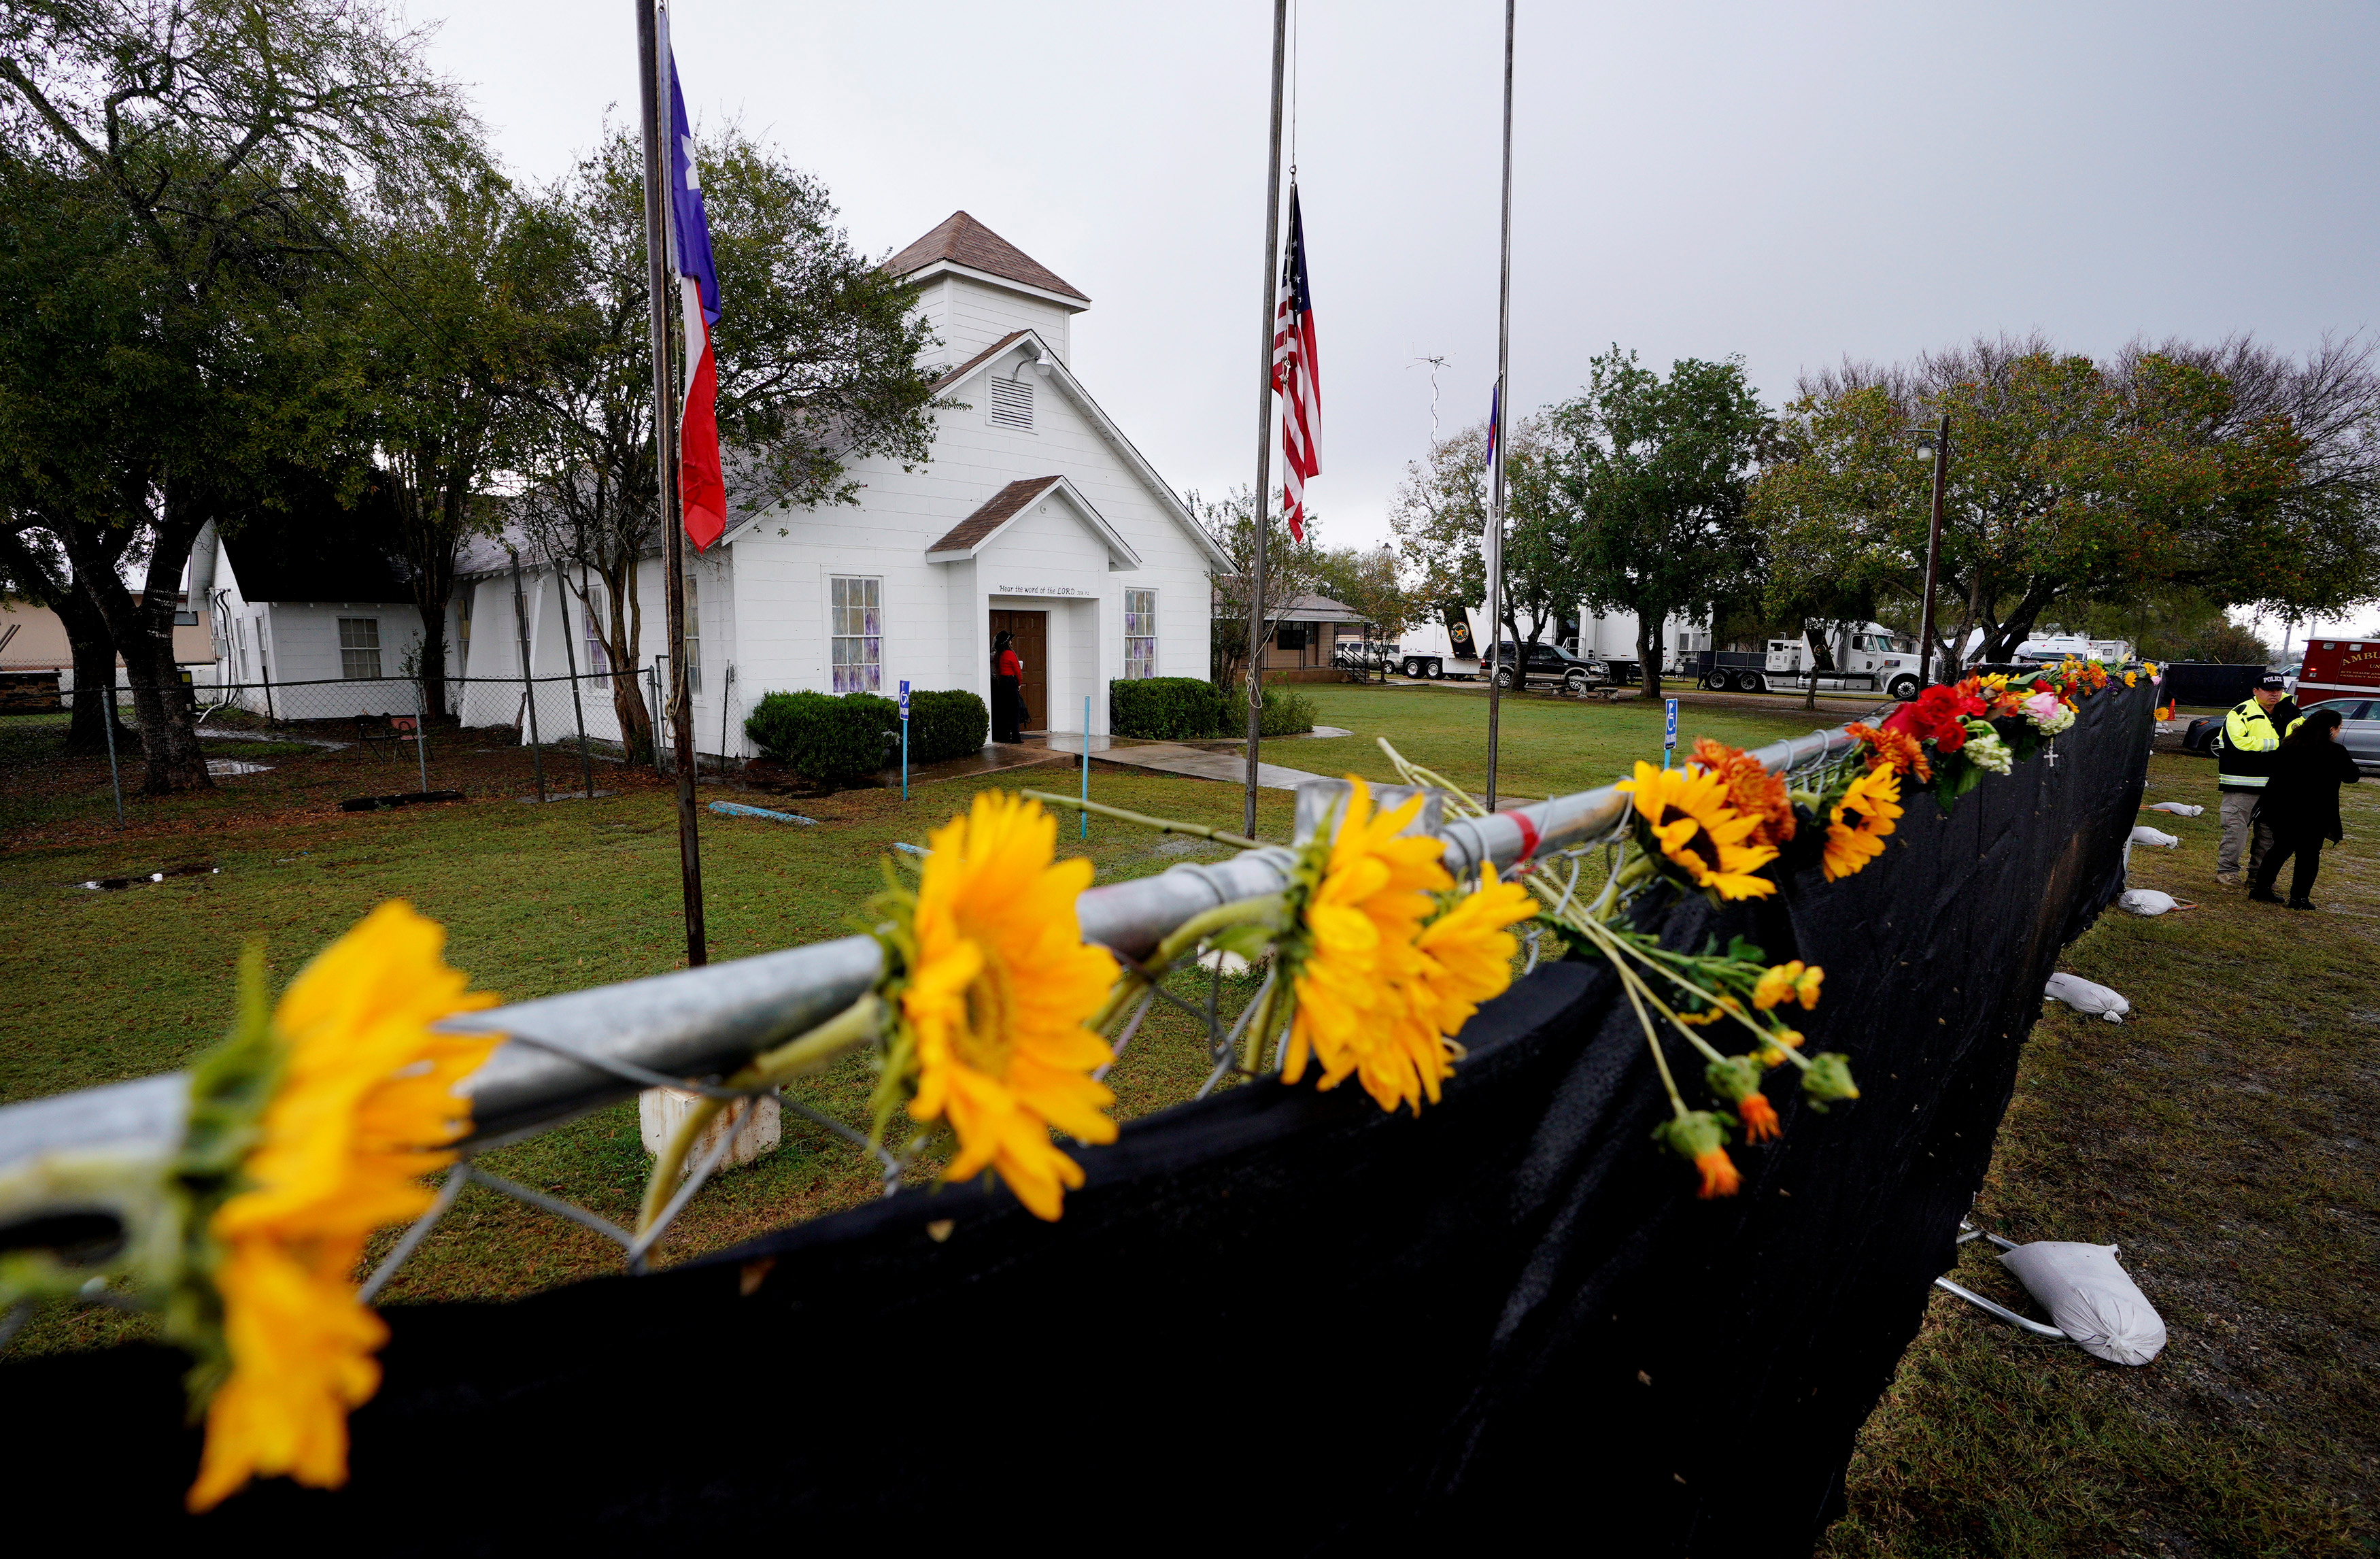 Flowers decorate the fence around the First Baptist Church of Sutherland Springs where 26 people were killed one week ago, as the church opens to the public as a memorial to those killed